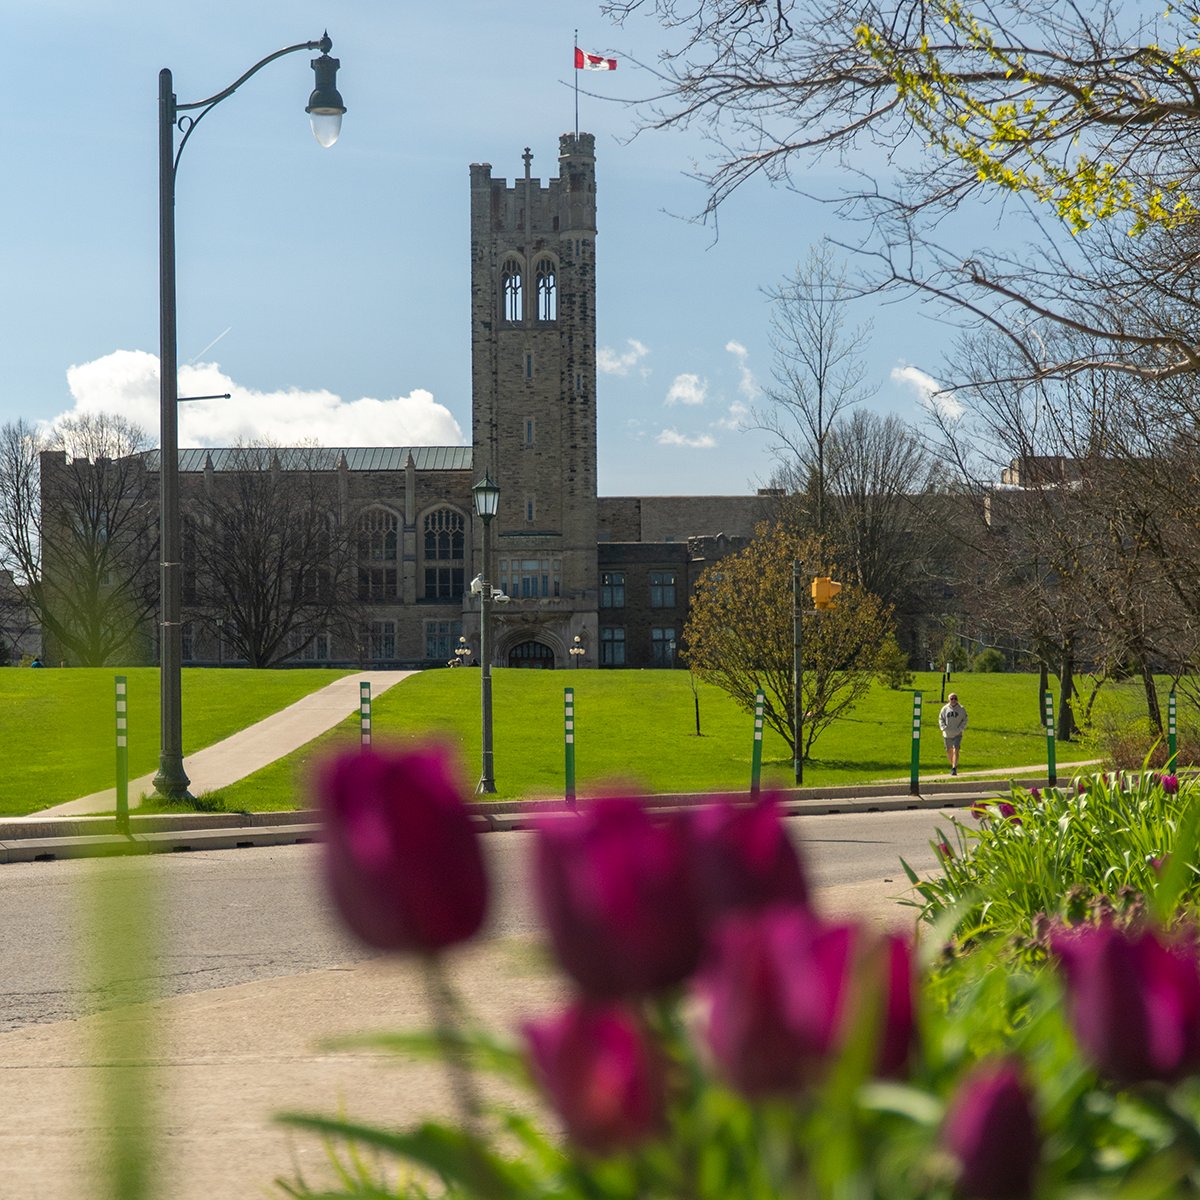 It's the last day of exams and the official end of winter term, #WesternU! Whether you're taking a break from campus for the summer or staying to take courses, don't forget our international student advising team will be here to help if you need support: iesc.uwo.ca/about_us/advis…